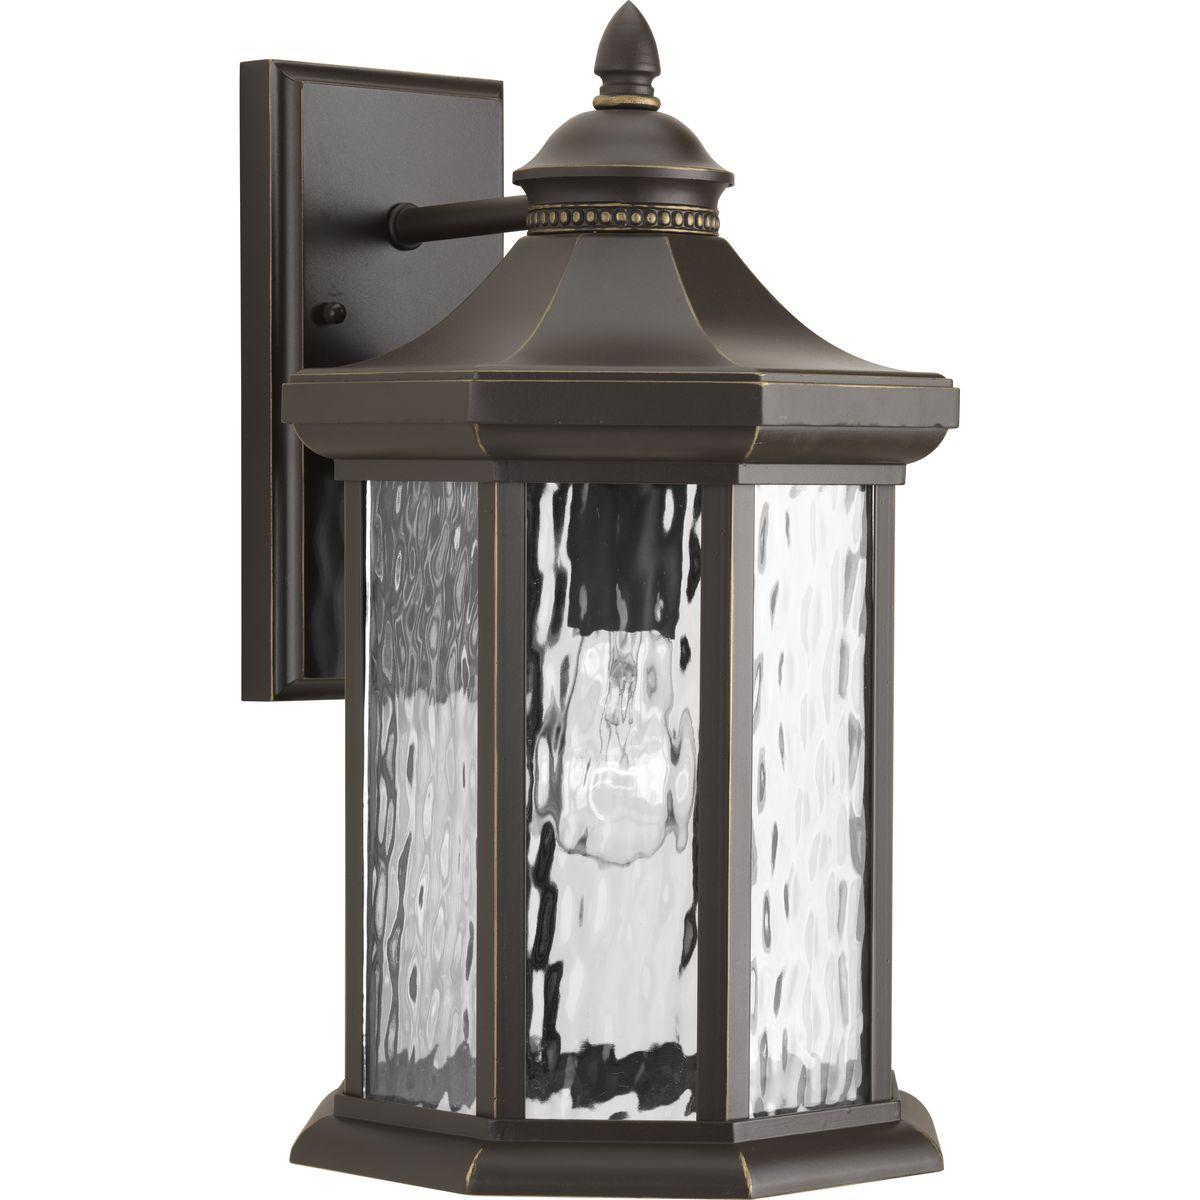 Hubbell P6072-20 The one-light large wall lantern in the Edition collection features distinctive octagonal shape for classic styling. Clear water glass elements are accented by a Antique Bronze finish. Die-cast aluminum construction with a powder coat finish makes this a 